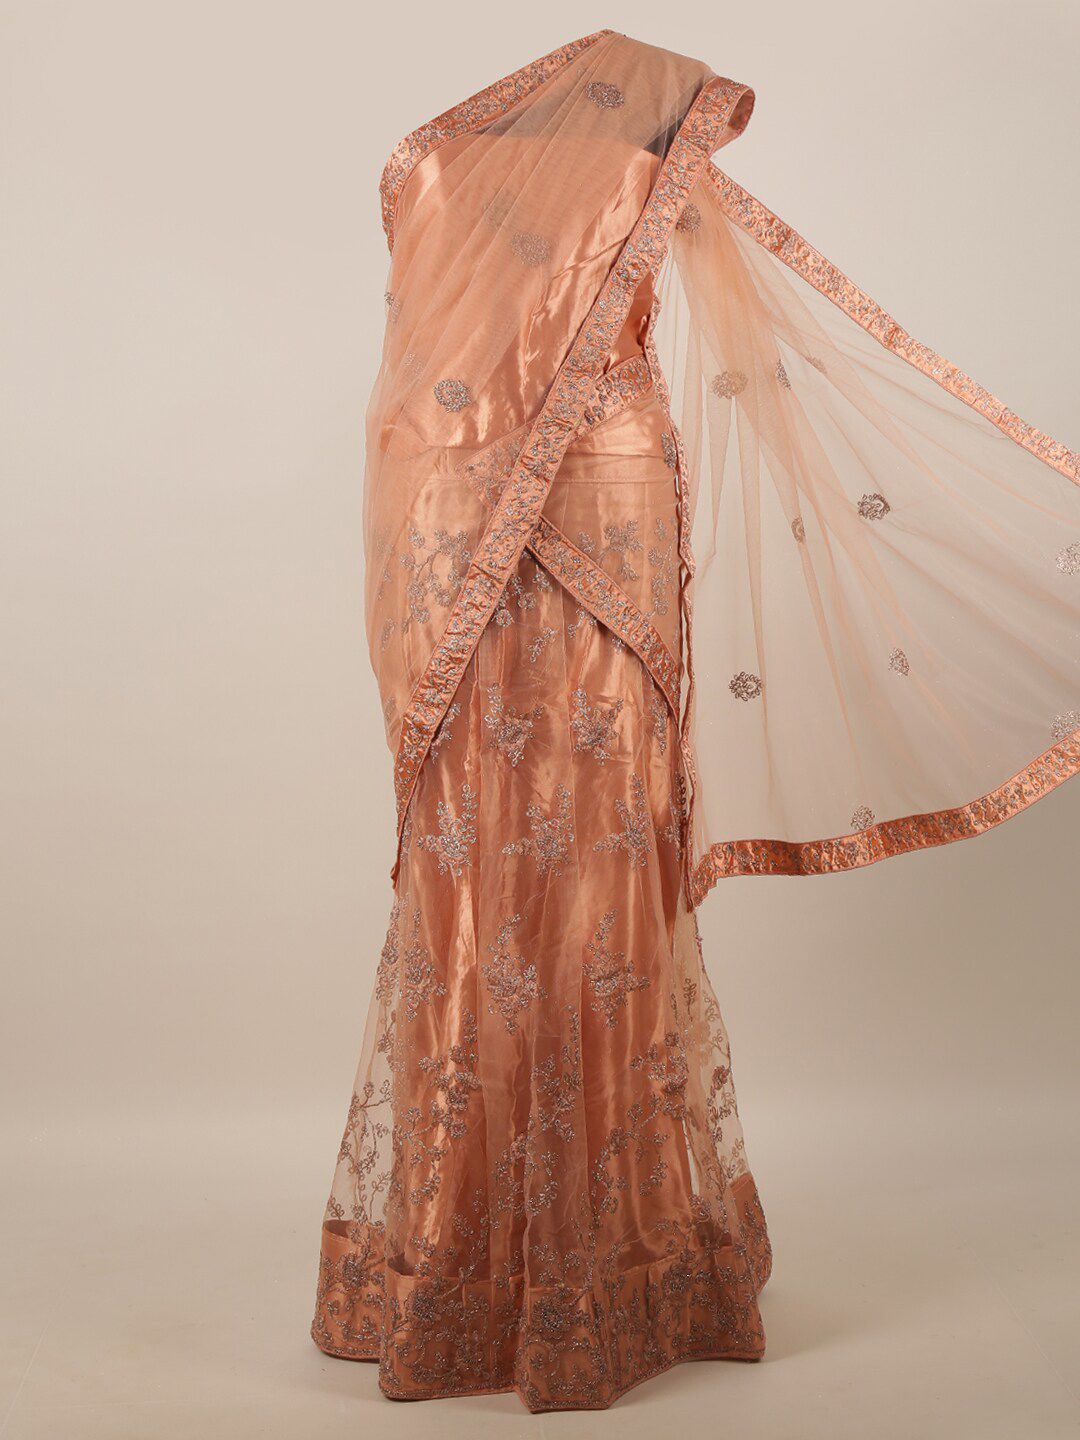 Pothys Peach-Coloured & Silver-Toned Embellished Unstitched Lehenga & Blouse With Dupatta Price in India